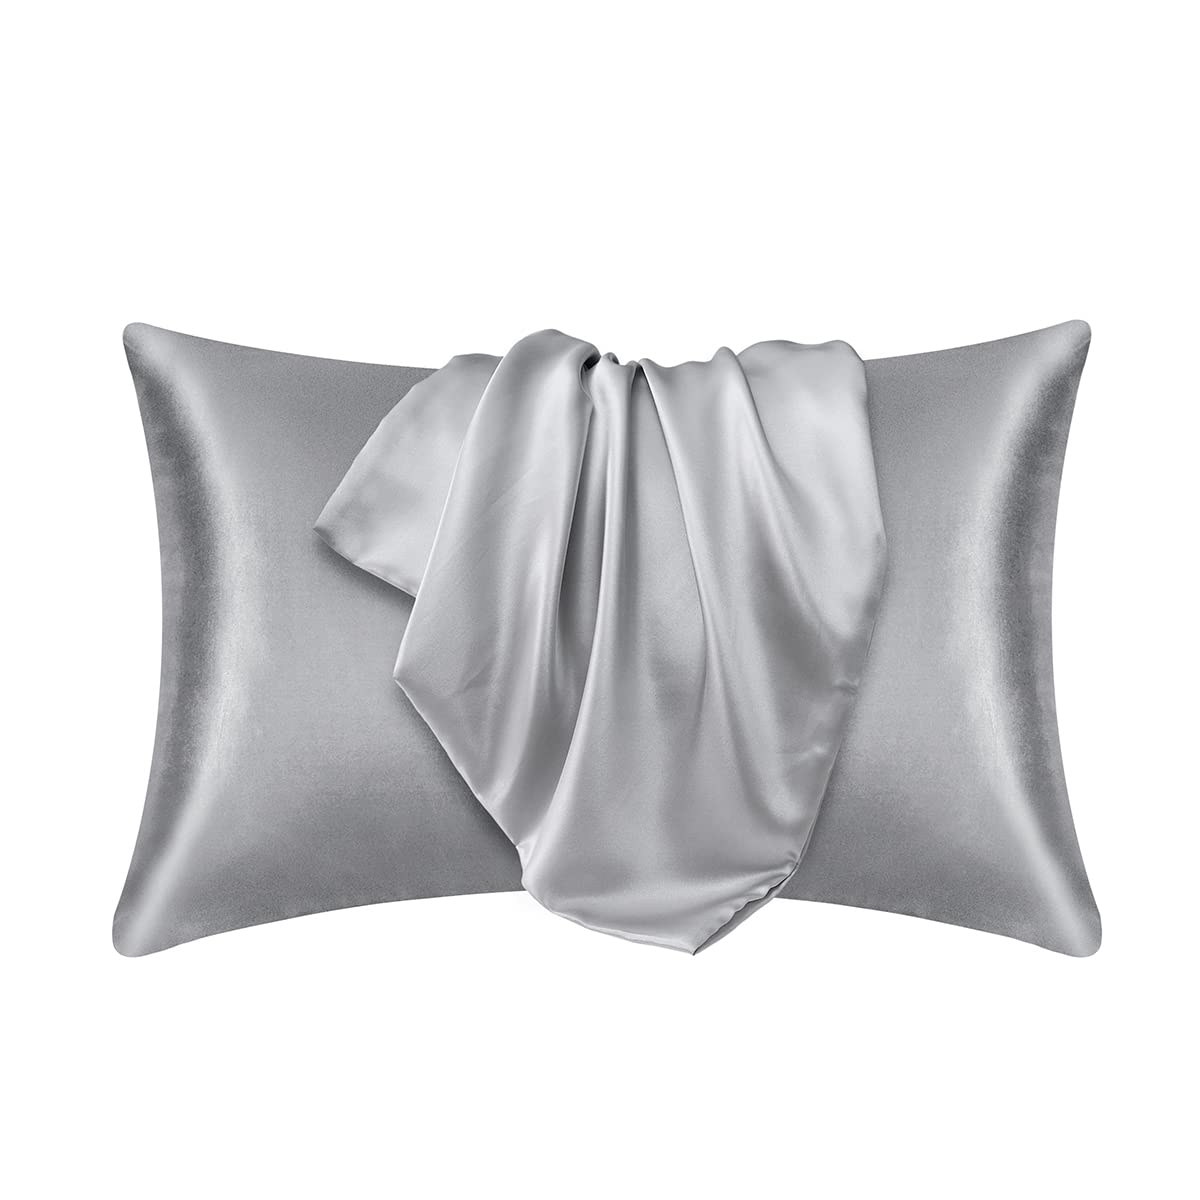 DuShow Satin Pillowcases For Hair And Skin,2 Pack Silky Grey Solid pillowcase Covers With Envelope Closure Standard 51 * 76cm